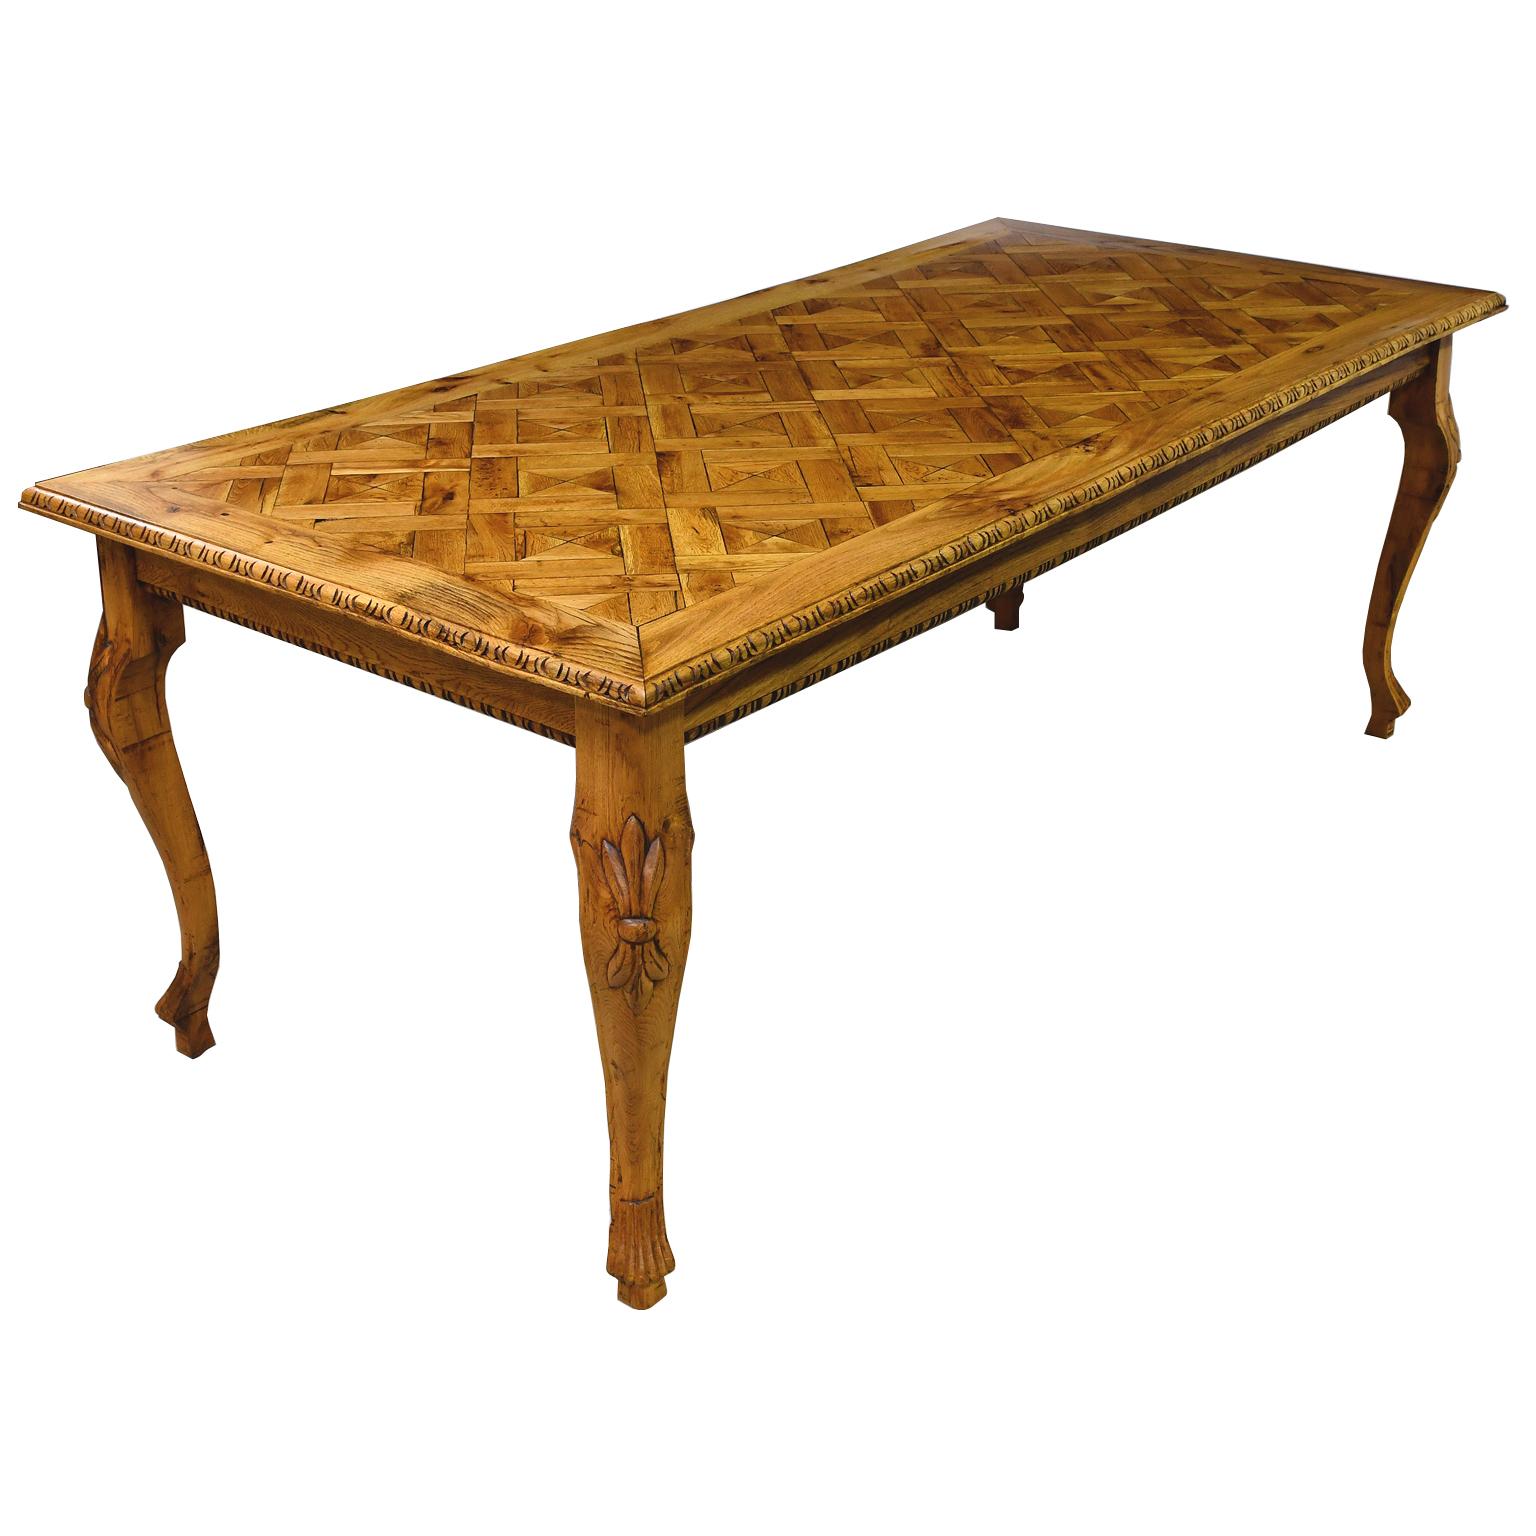 A beautiful custom-made European oak dining table with cabriole legs, carved knee and hand fitted parquetry top. Made entirely from repurposed solid antique oak that is over 200 years old and imported in the late 1990's.
Note: You should always